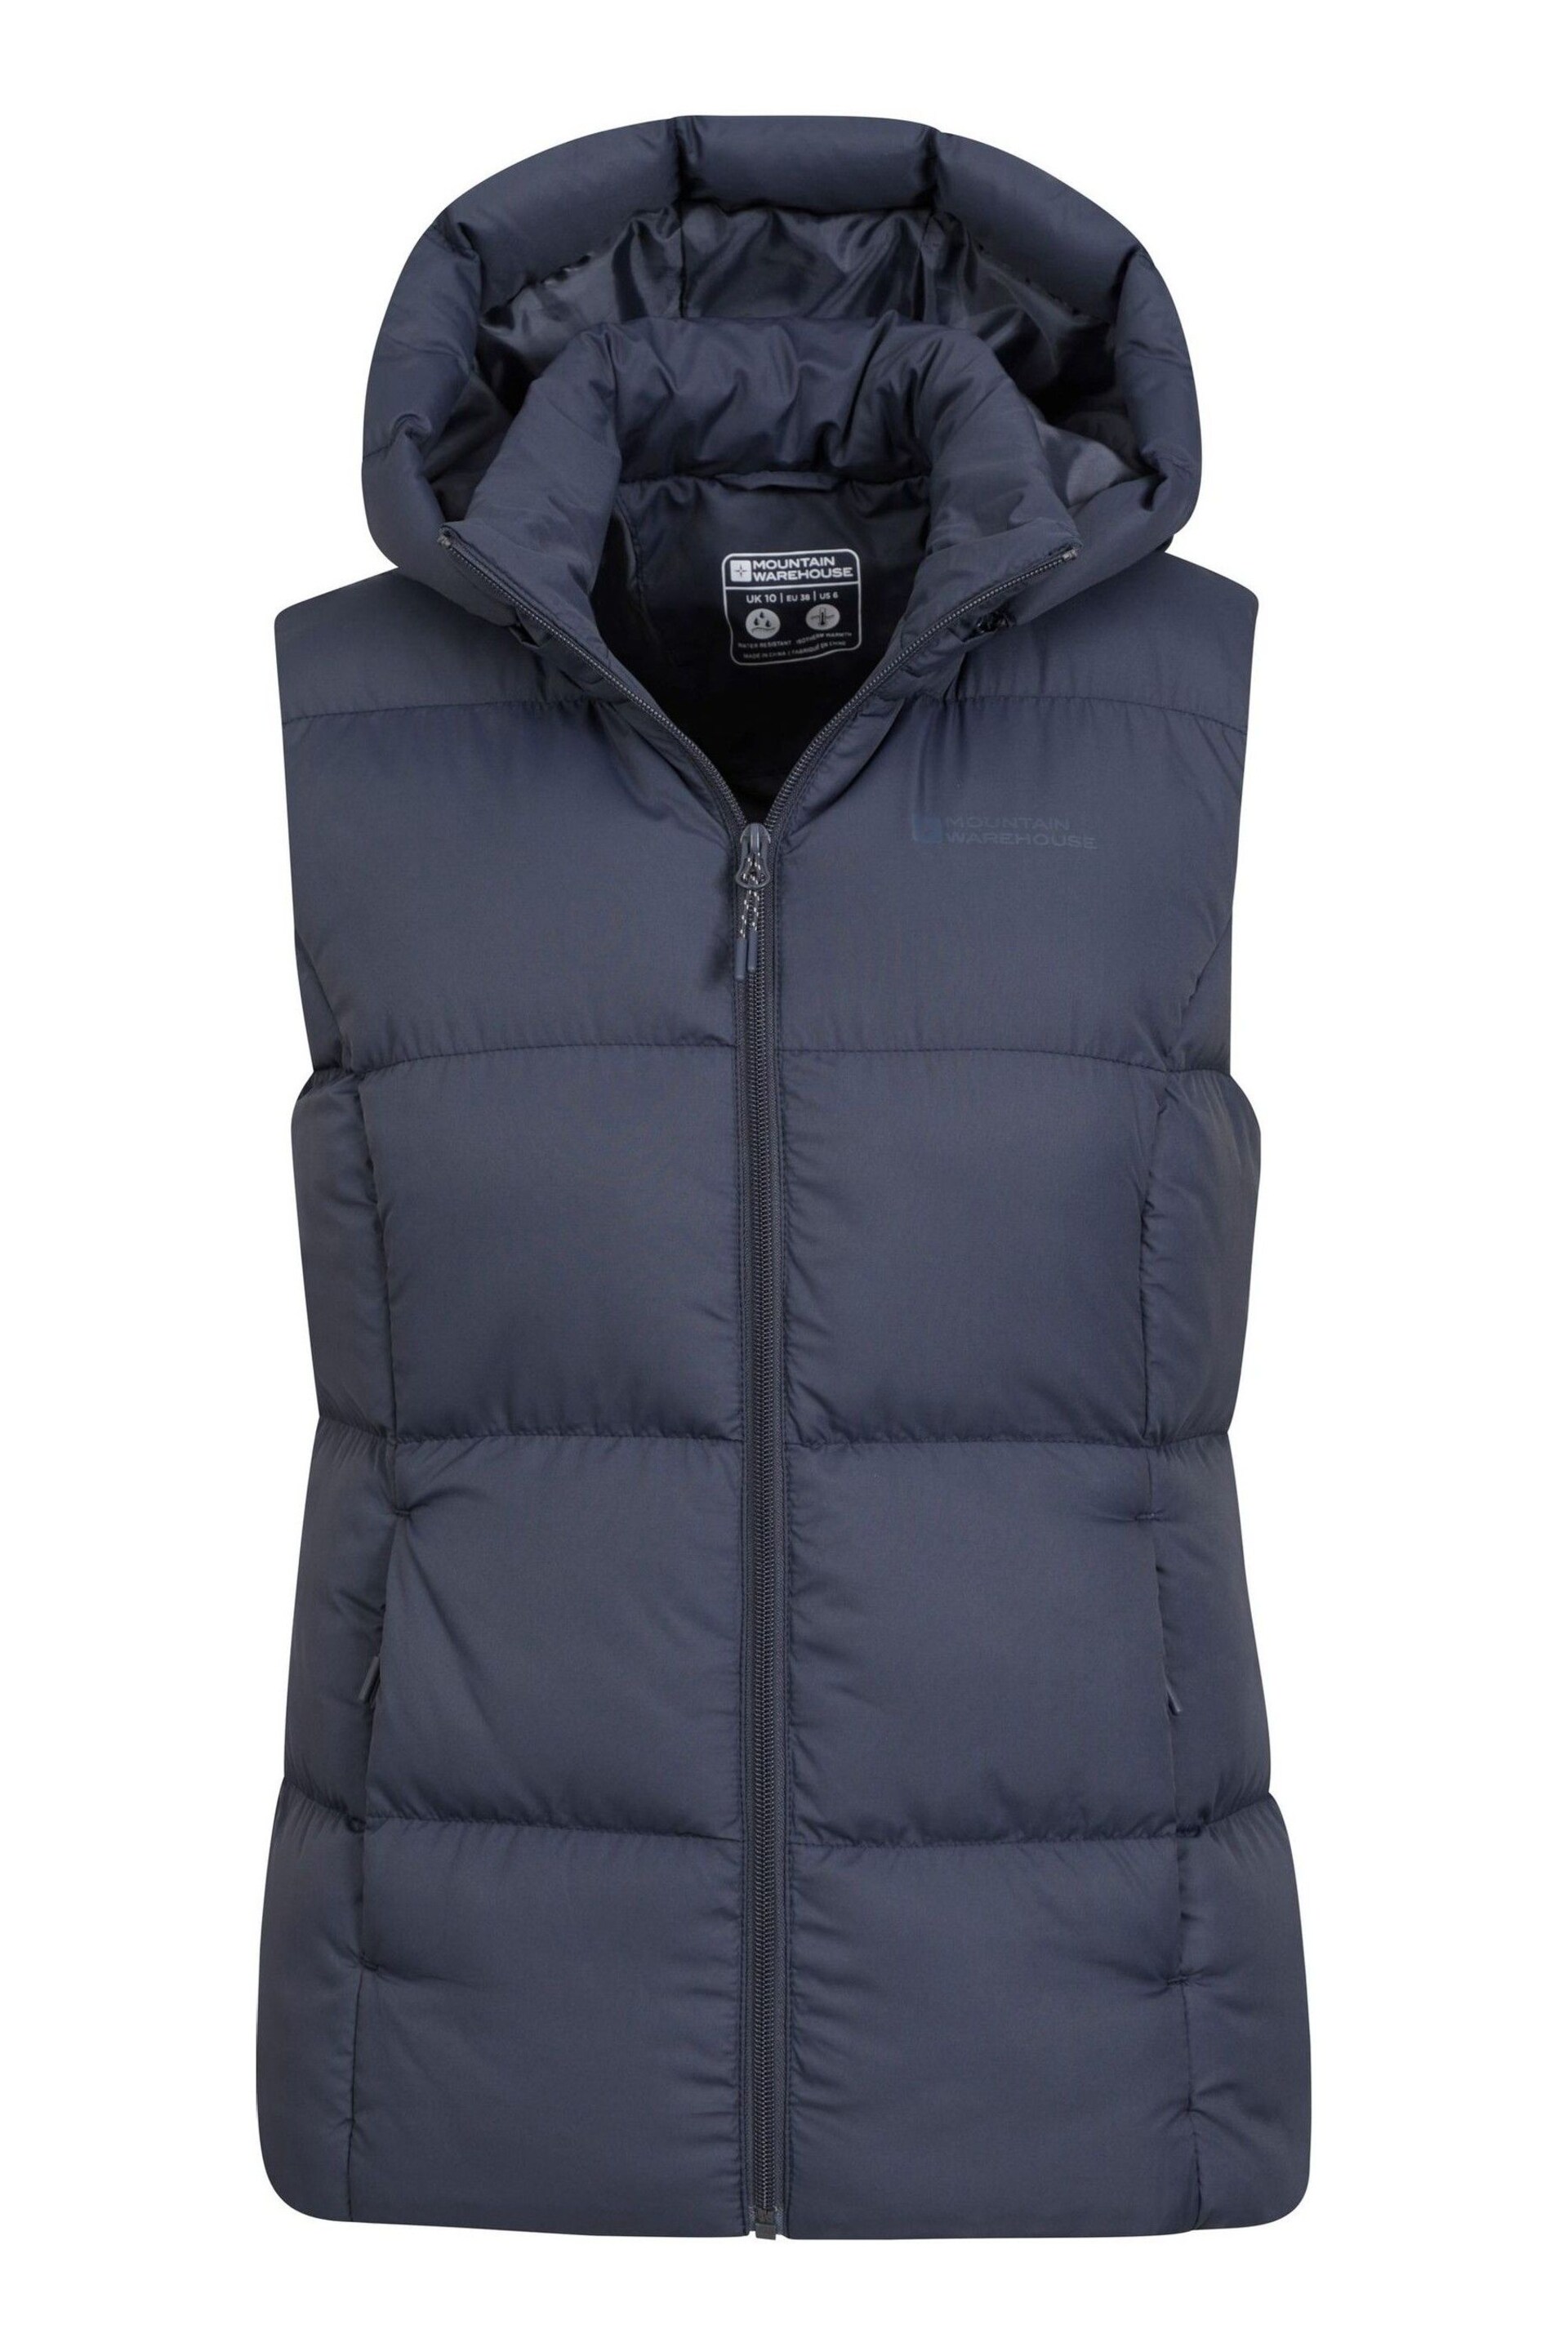 Mountain Warehouse Blue Astral Womens Padded Gilet - Image 5 of 6